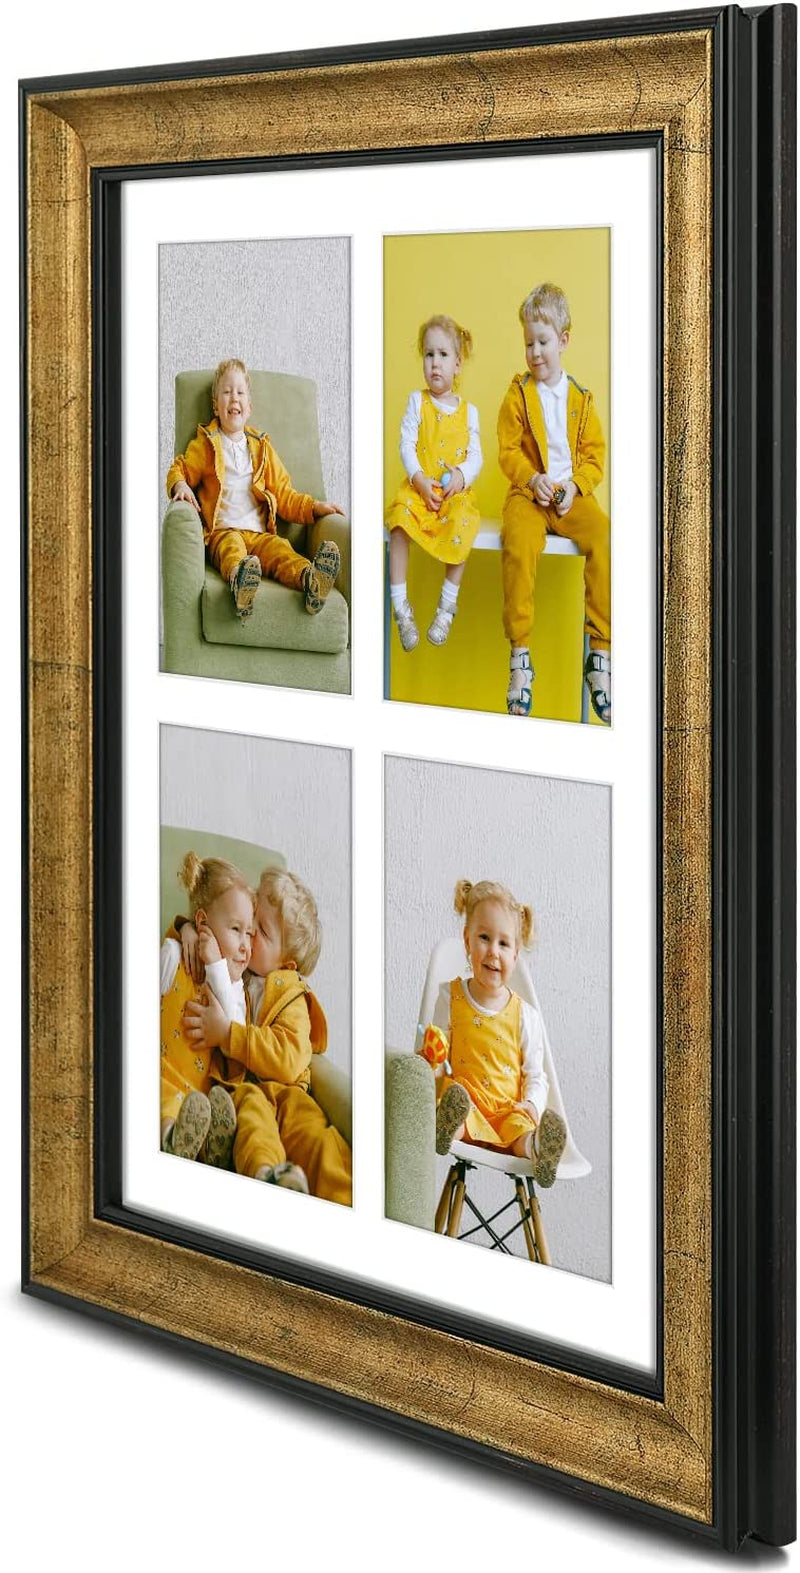 Golden State Art, 12X16 Collage Picture Frame - White Mat for 4-5X7 Photos - Real Glass - Landscape/Portrait Wall Display - Home Decor - Gift for Families, Students, Friends - Black Trim Gold Home & Garden > Decor > Picture Frames Golden State Art   